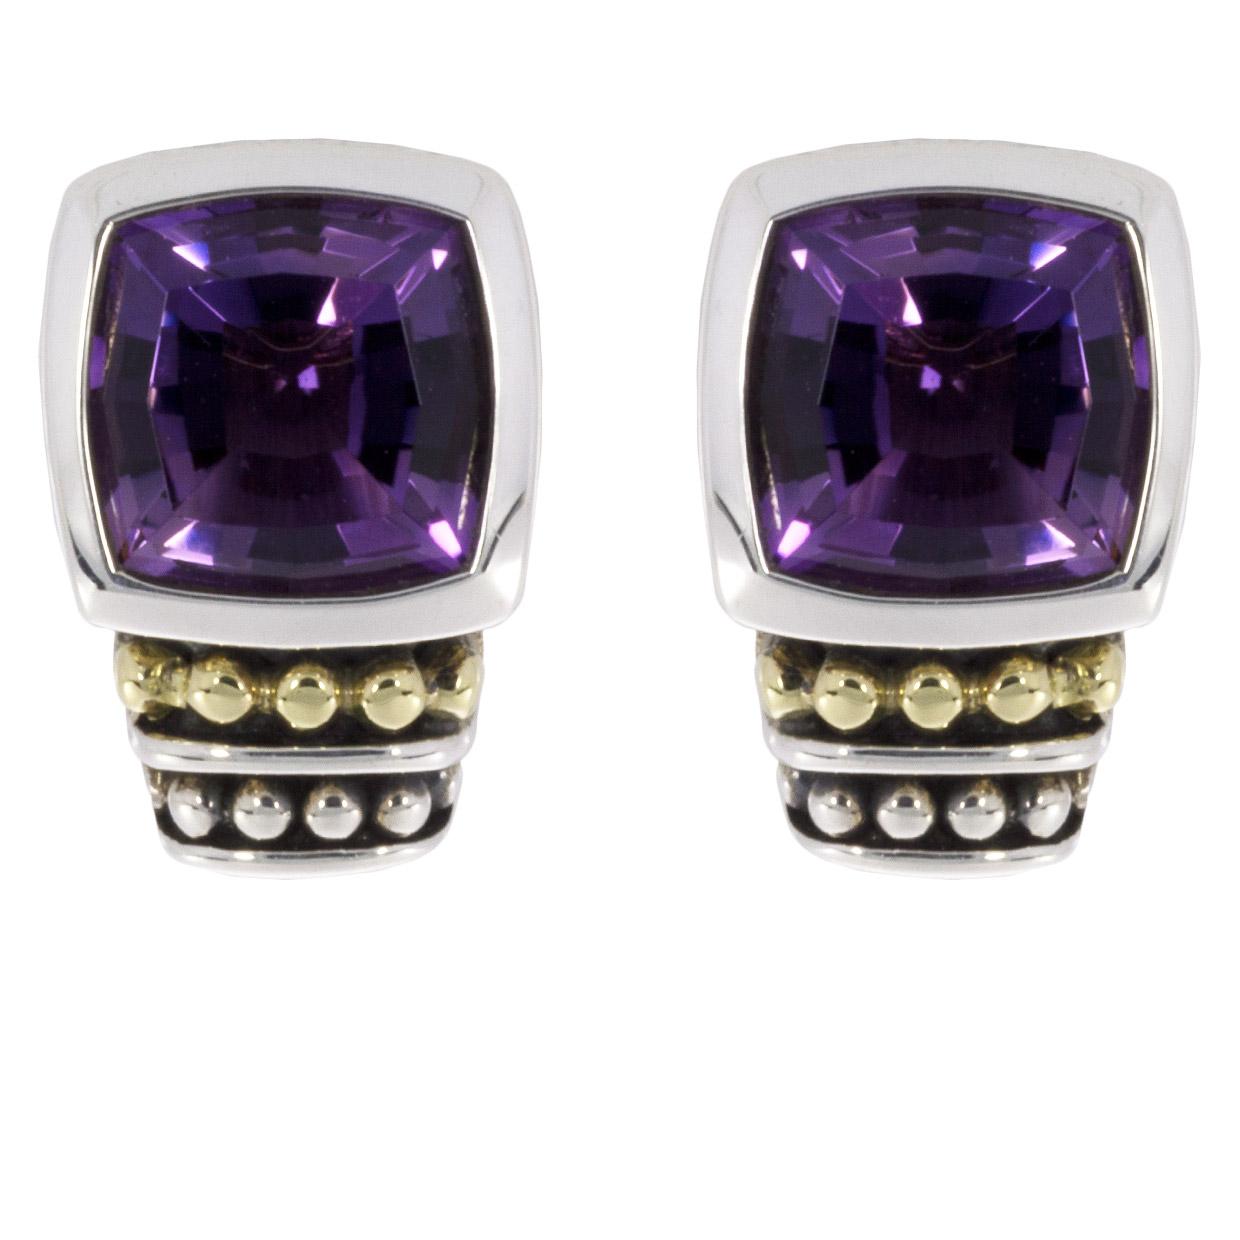 Item Details

Main Stone Shape Cushion Cut
Main Stone Treatment Not Enhanced
Main Stone Creation Natural
Main Stone Amethyst
Main Stone Color Purple
Estimated Retail $395.00
Brand Lagos
Collection Caviar Color
Metal Gold & Silver
Style